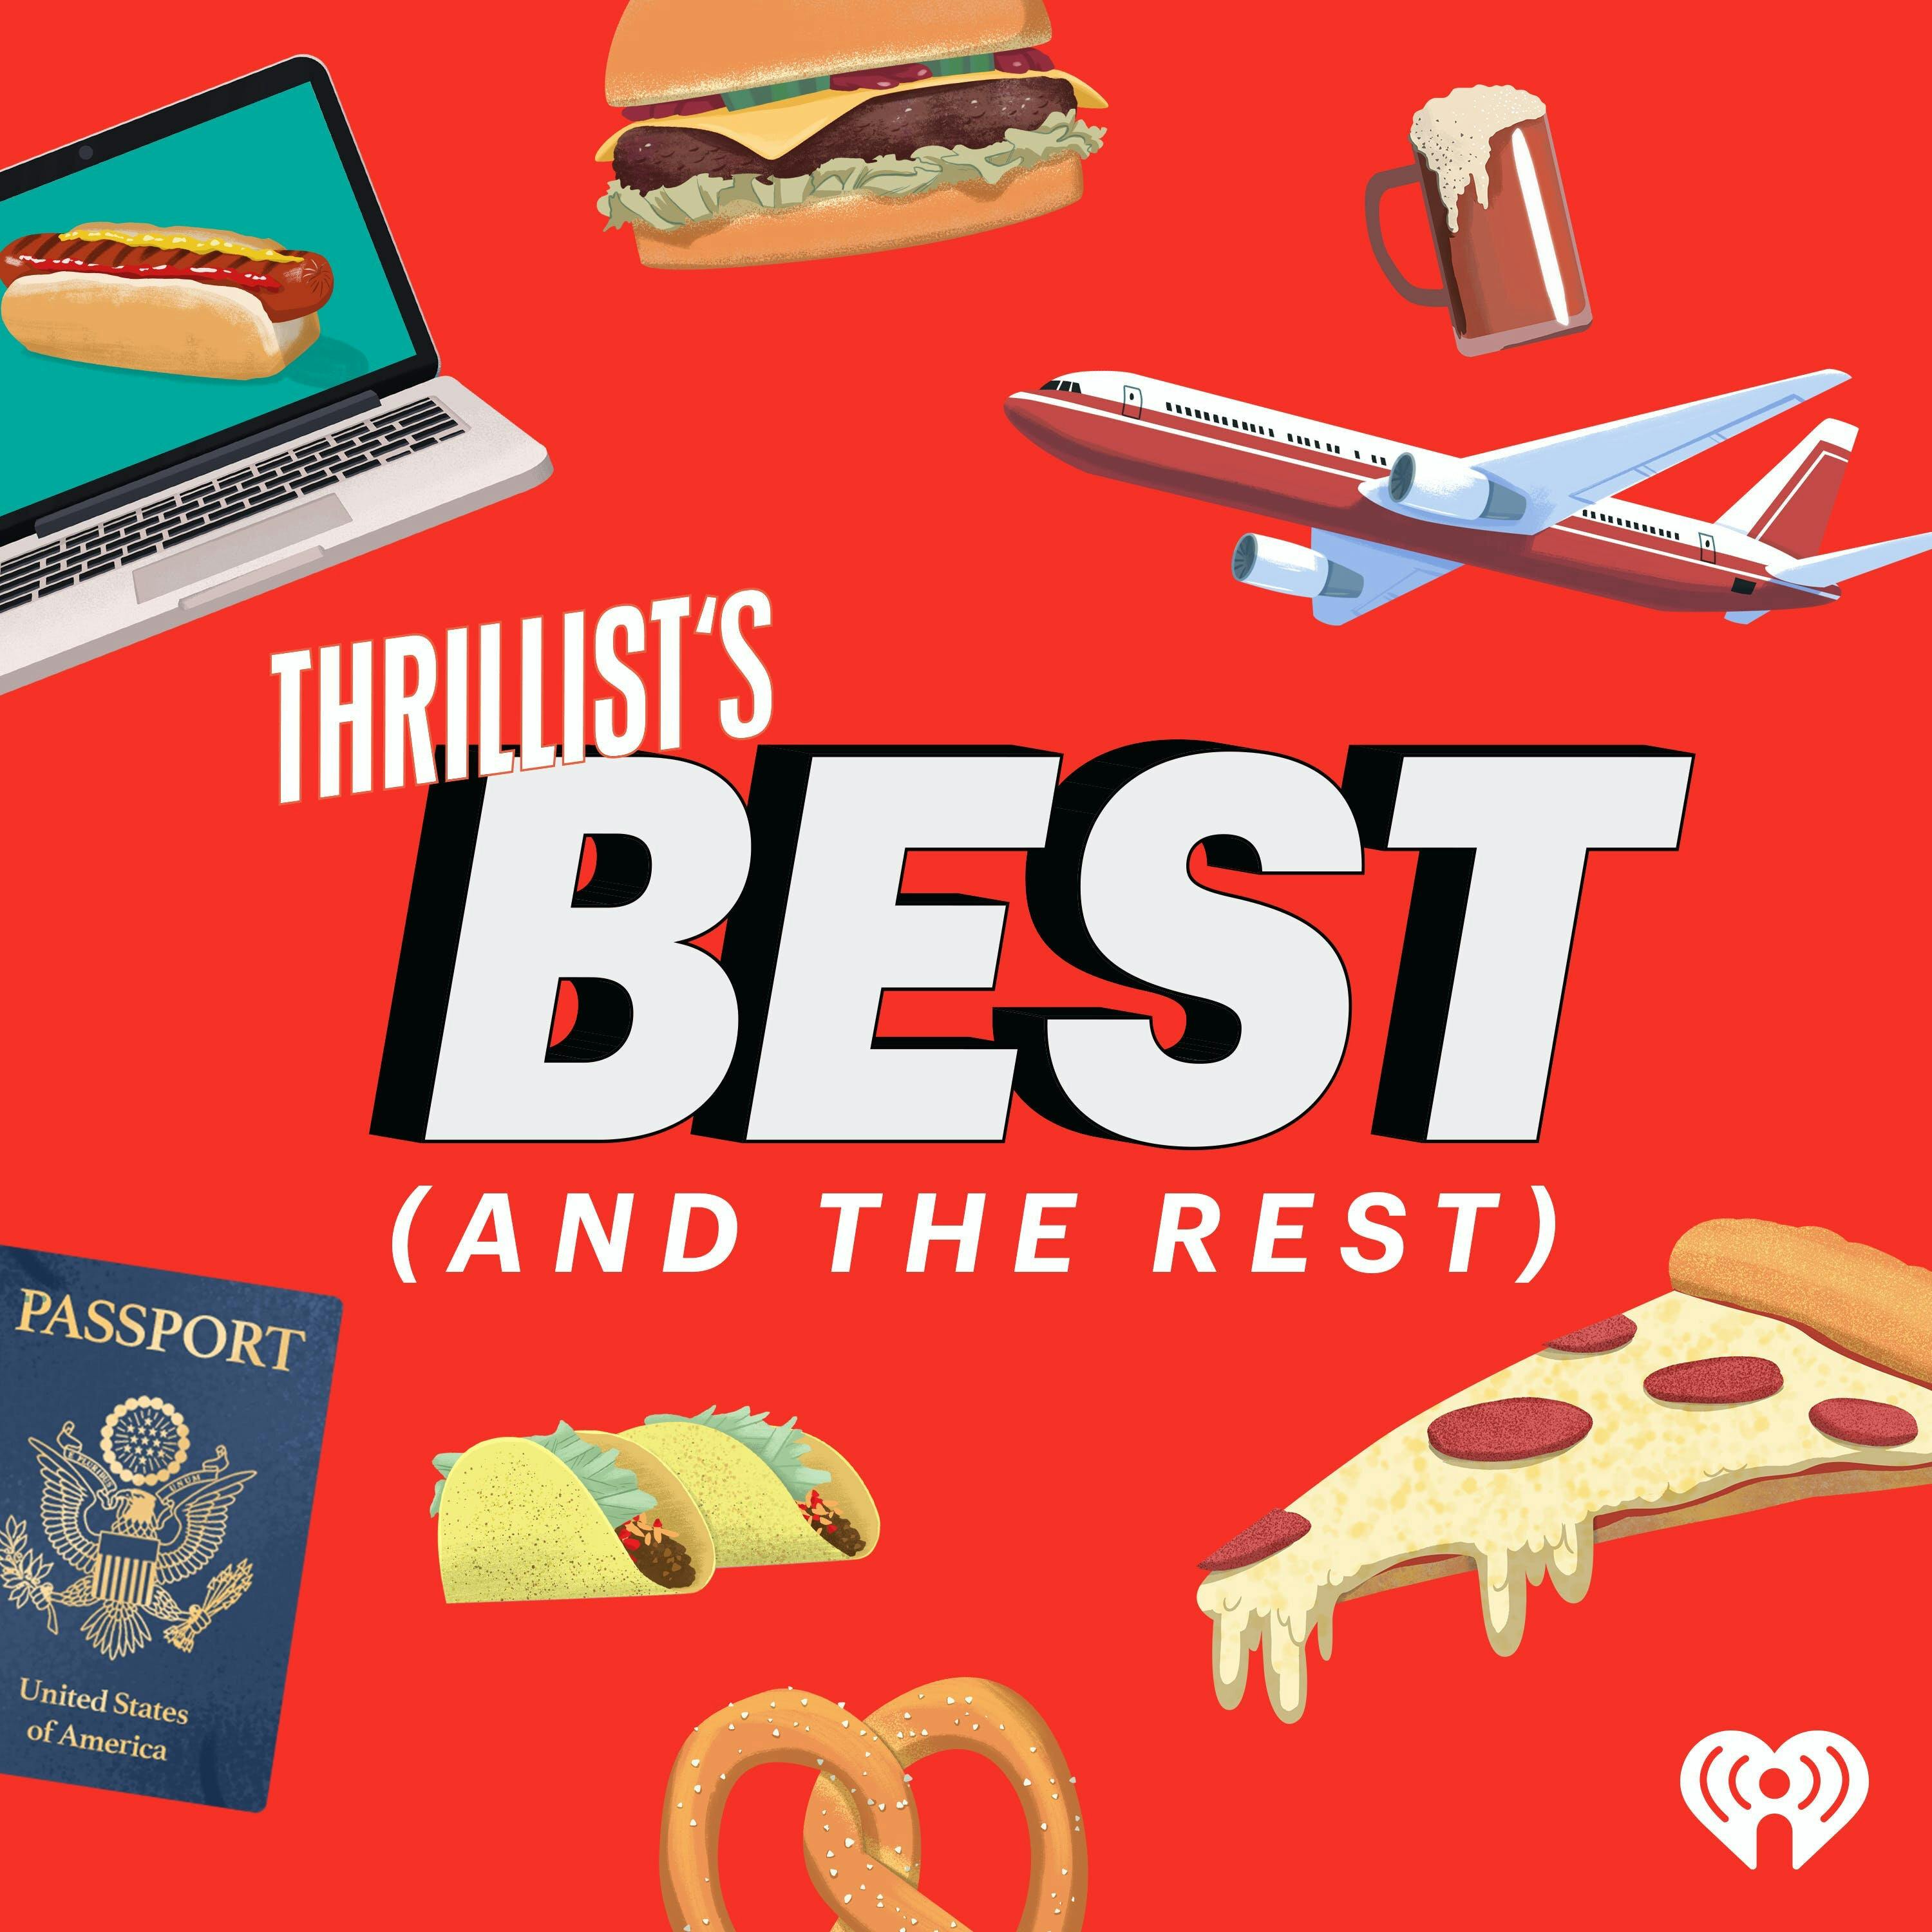 THRILLIST'S BEST: What’s the Perfect Fast Food Meal?